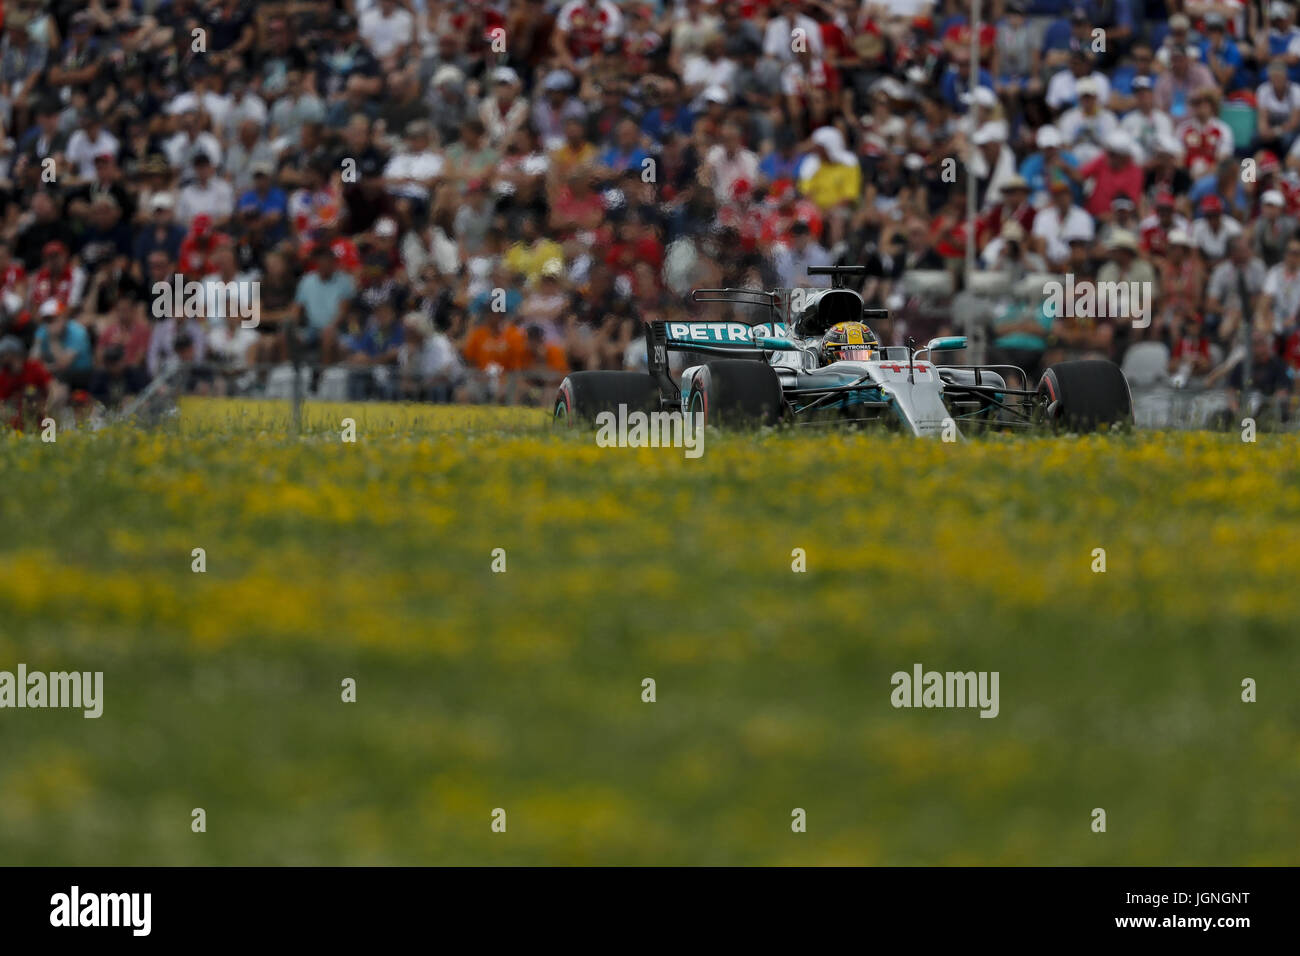 Spielberg, Austria. 8th July, 2017. LEWIS HAMILTON of Great Britain and Mercedes AMG Petronas F1 Team drives during the qualifying session of the 2017 Formula 1 Austrian Grand Prix in Spielberg, Austria. Credit: James Gasperotti/ZUMA Wire/Alamy Live News Stock Photo